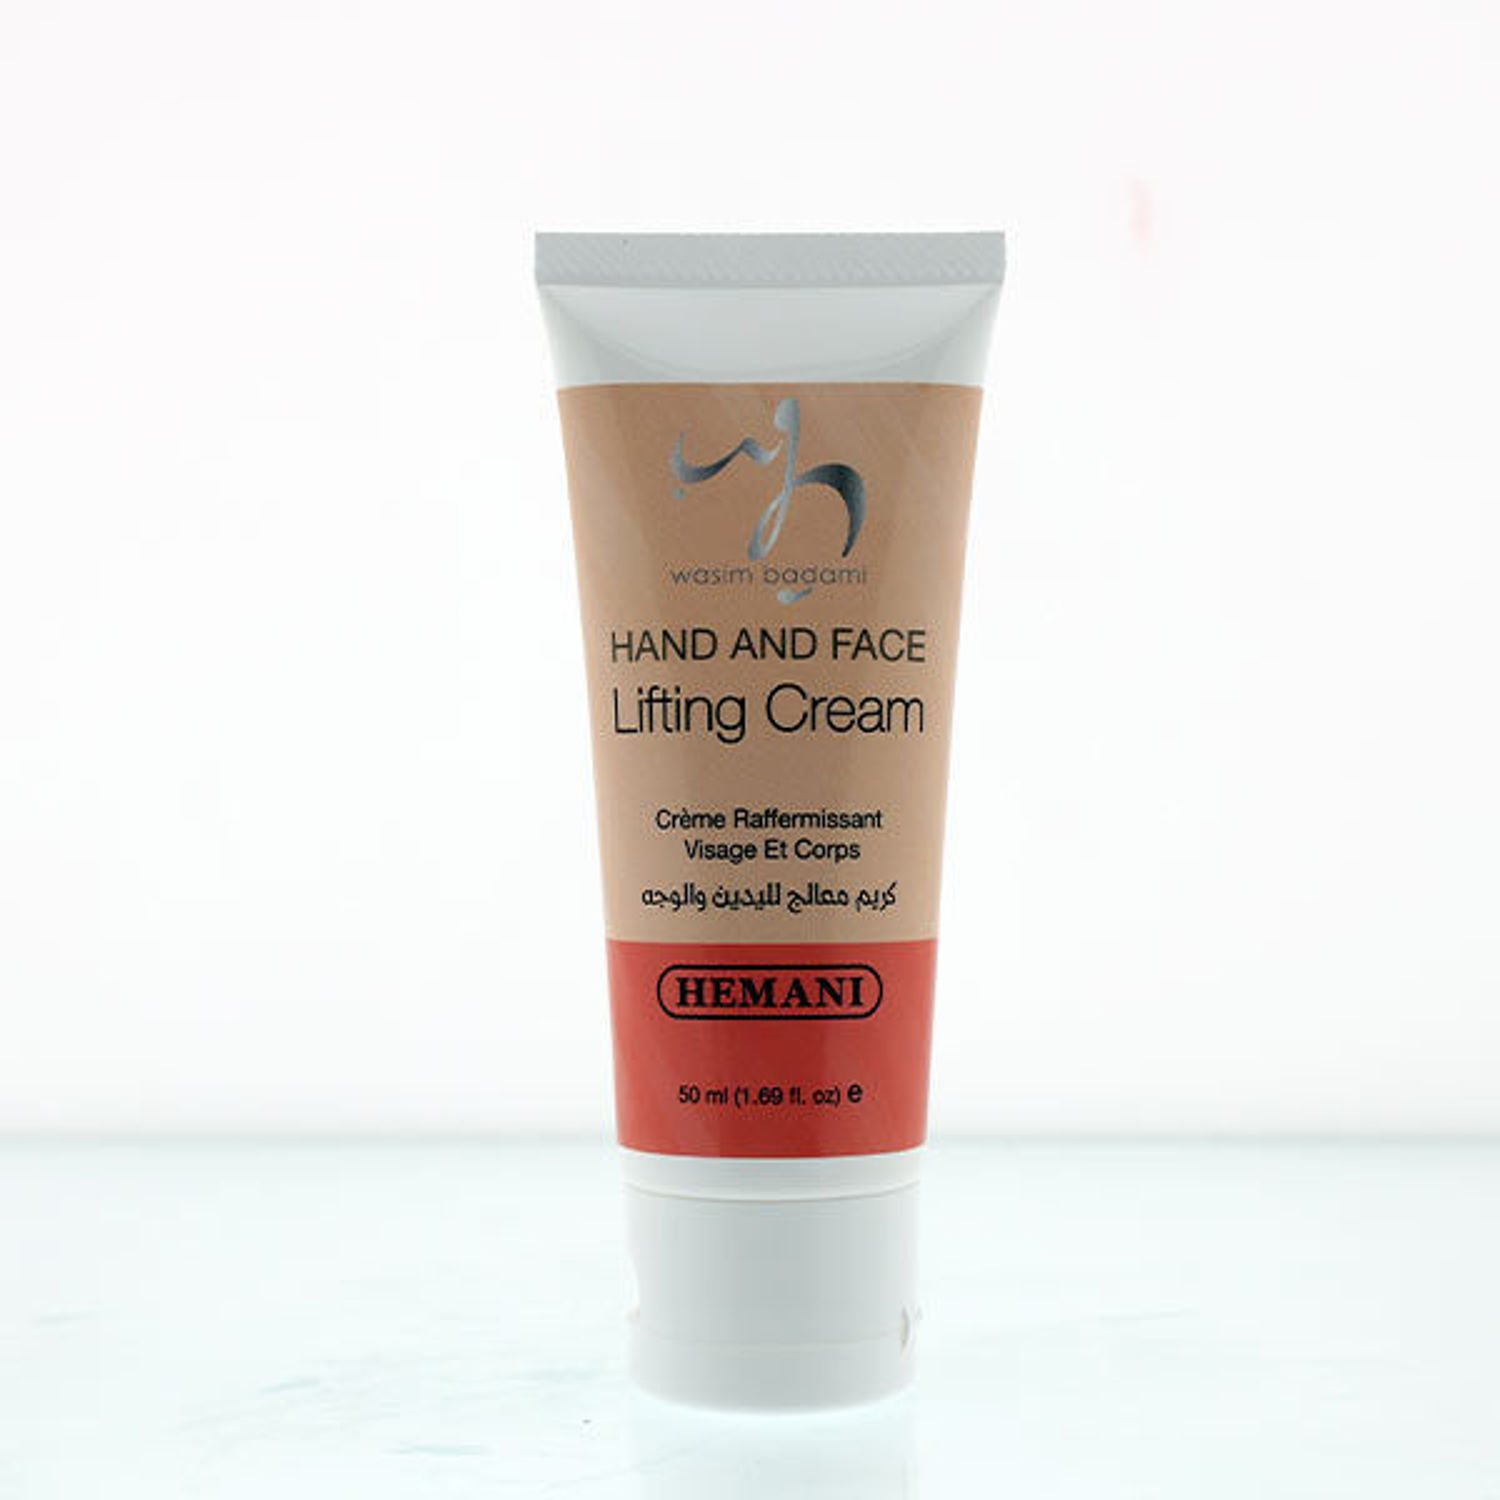 Hand and Face Lifting Cream